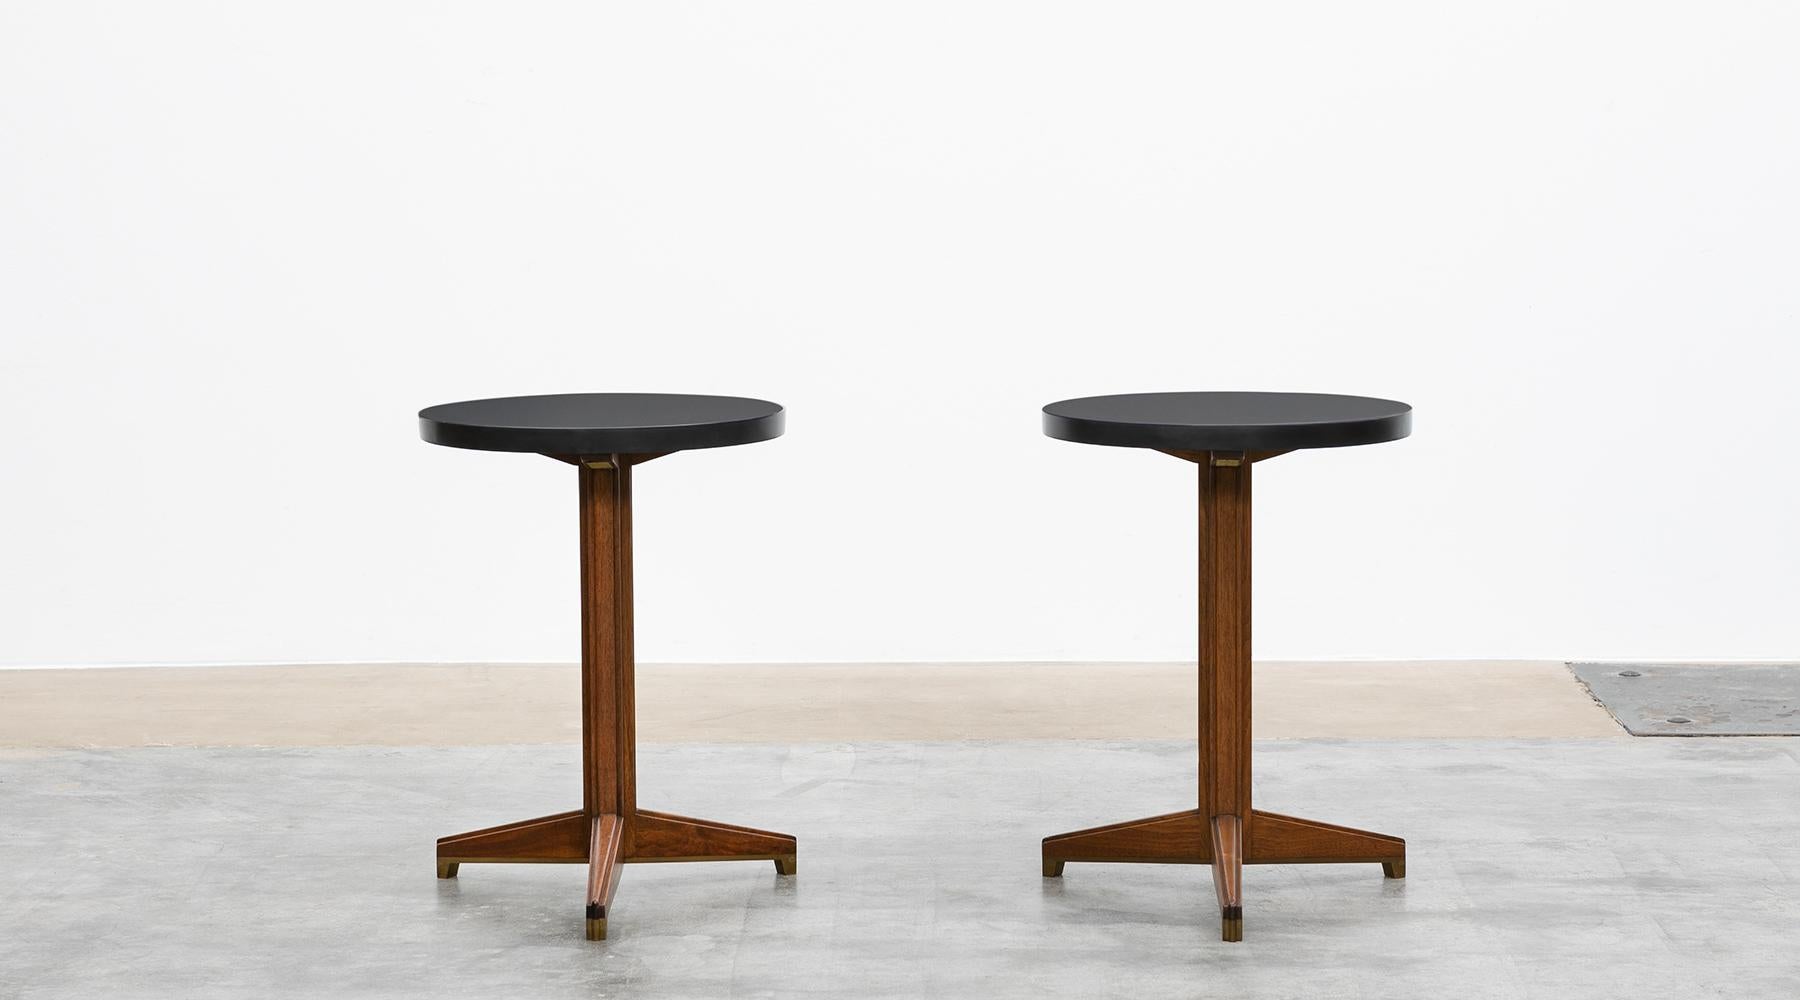 Pair of side tables, slate, mahogany, brass by Edward Wormley, USA, 1957.

This elaborate pair of occasional tables designed by Edward Wormley comes with a tabletop in slate, mahogany base. The proportions are particularly perfect and come on